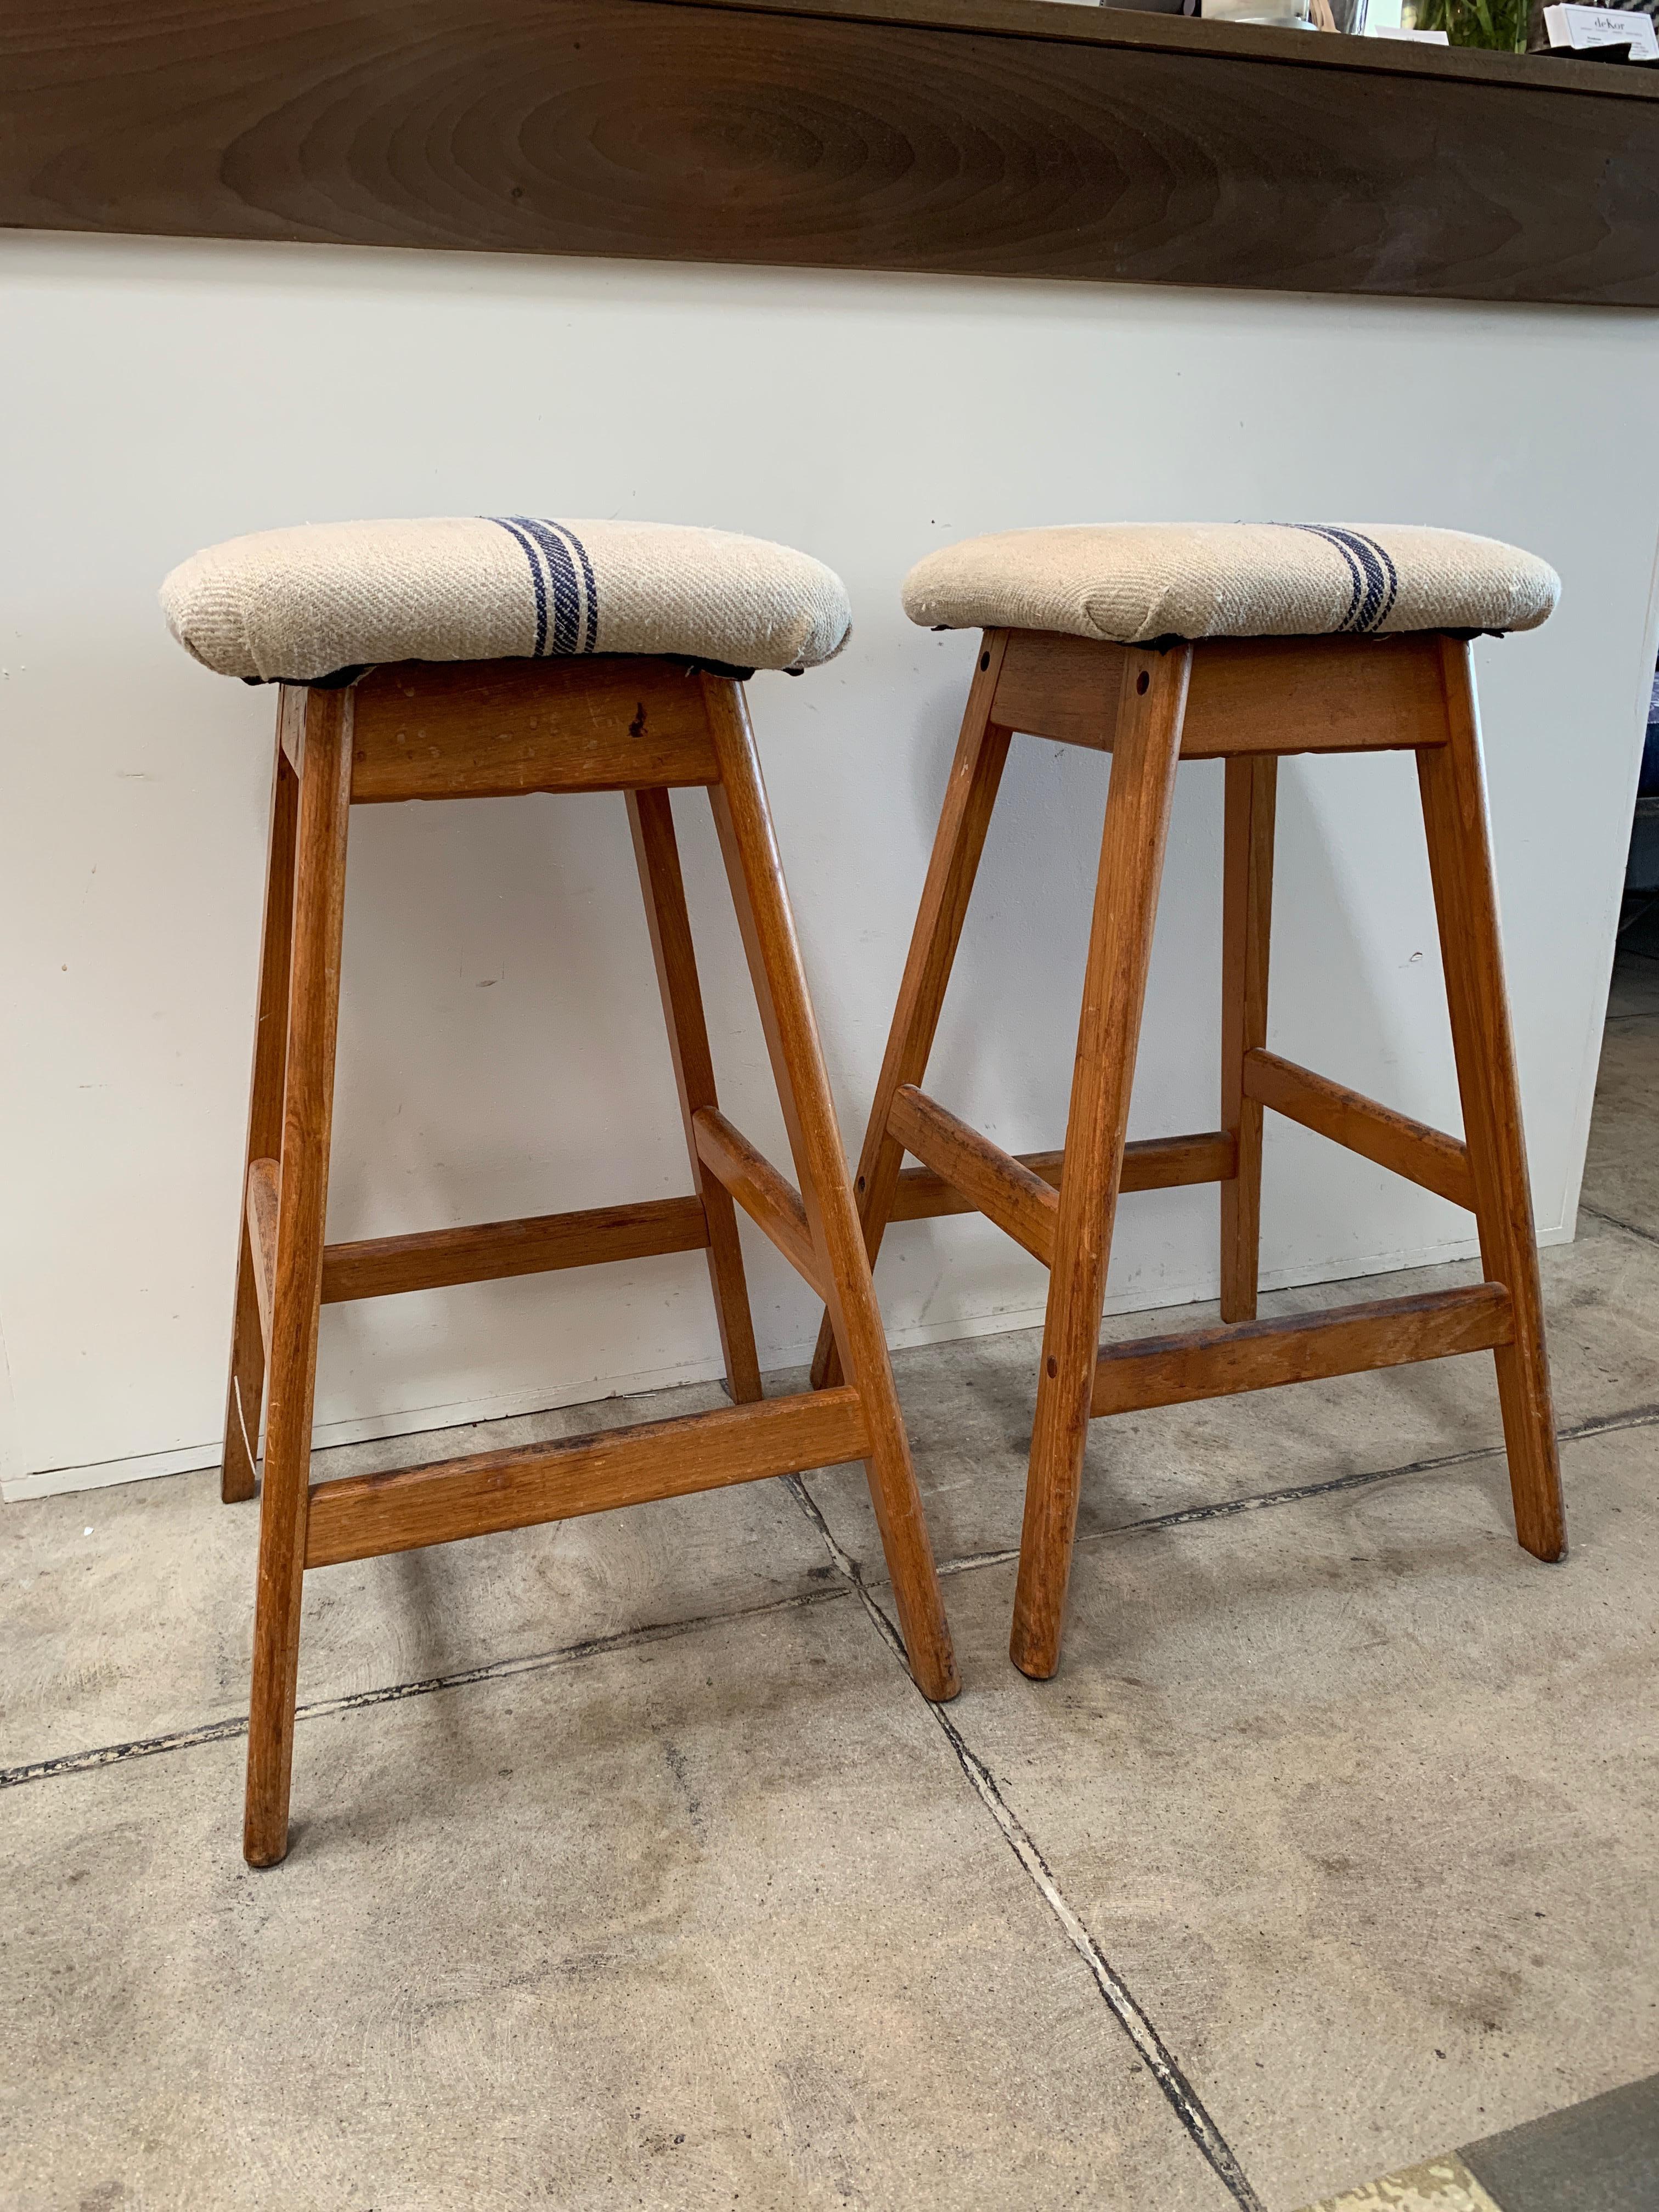 Made in Denmark by Vamdrup Stolfabrik. Reupholstered with vintage grain-sack fabric. Comfortable stools at a perfect bar height, Classic Danish design with minimal wear.